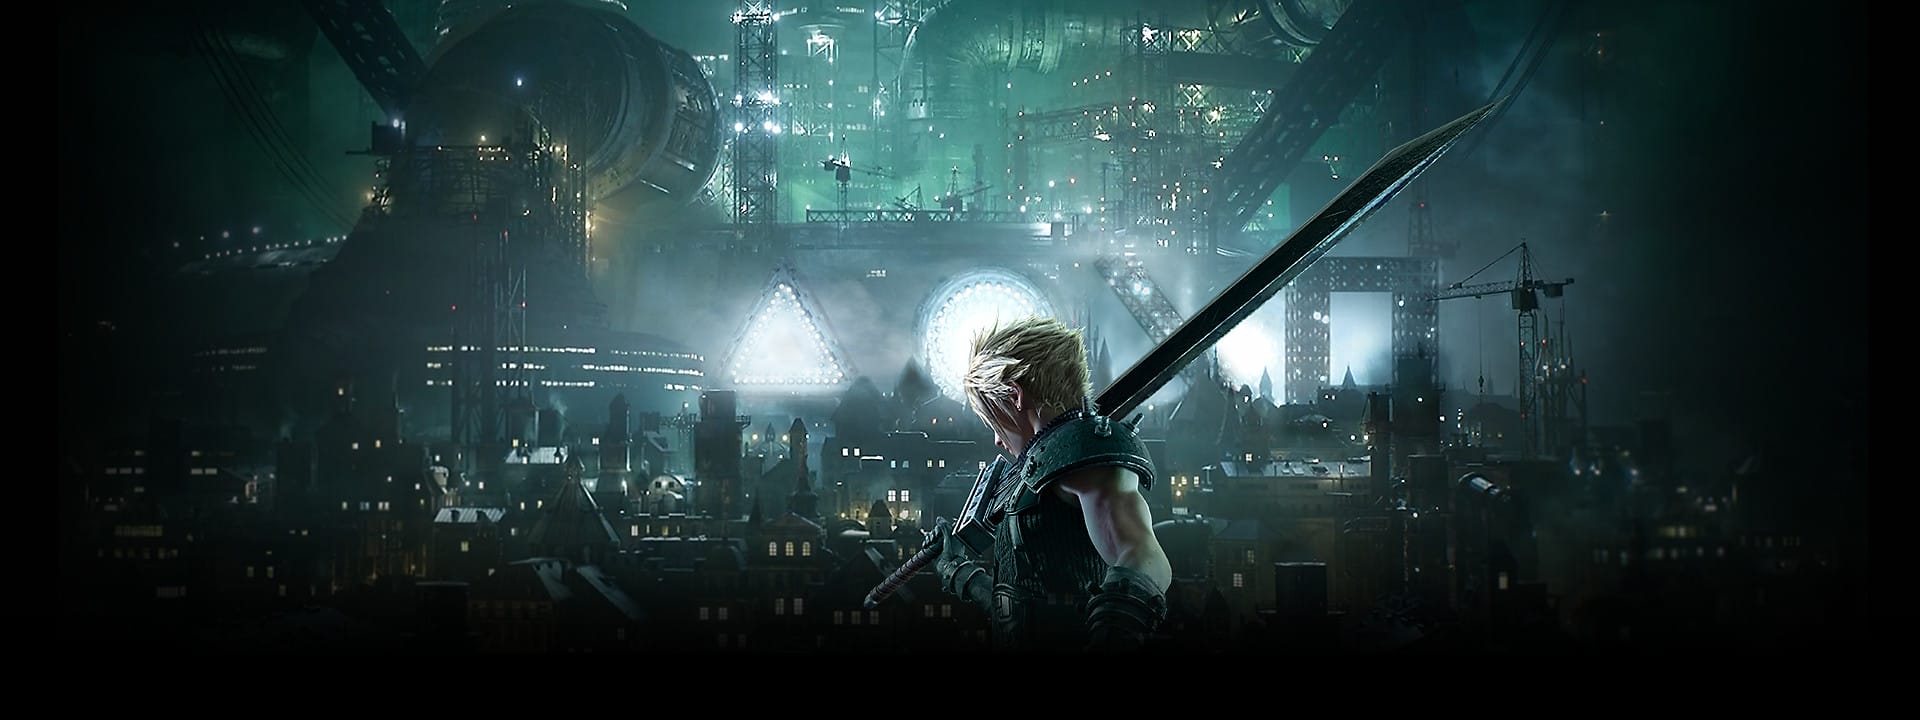 Final Fantasy 7 Remake Tops The United States Charts in April